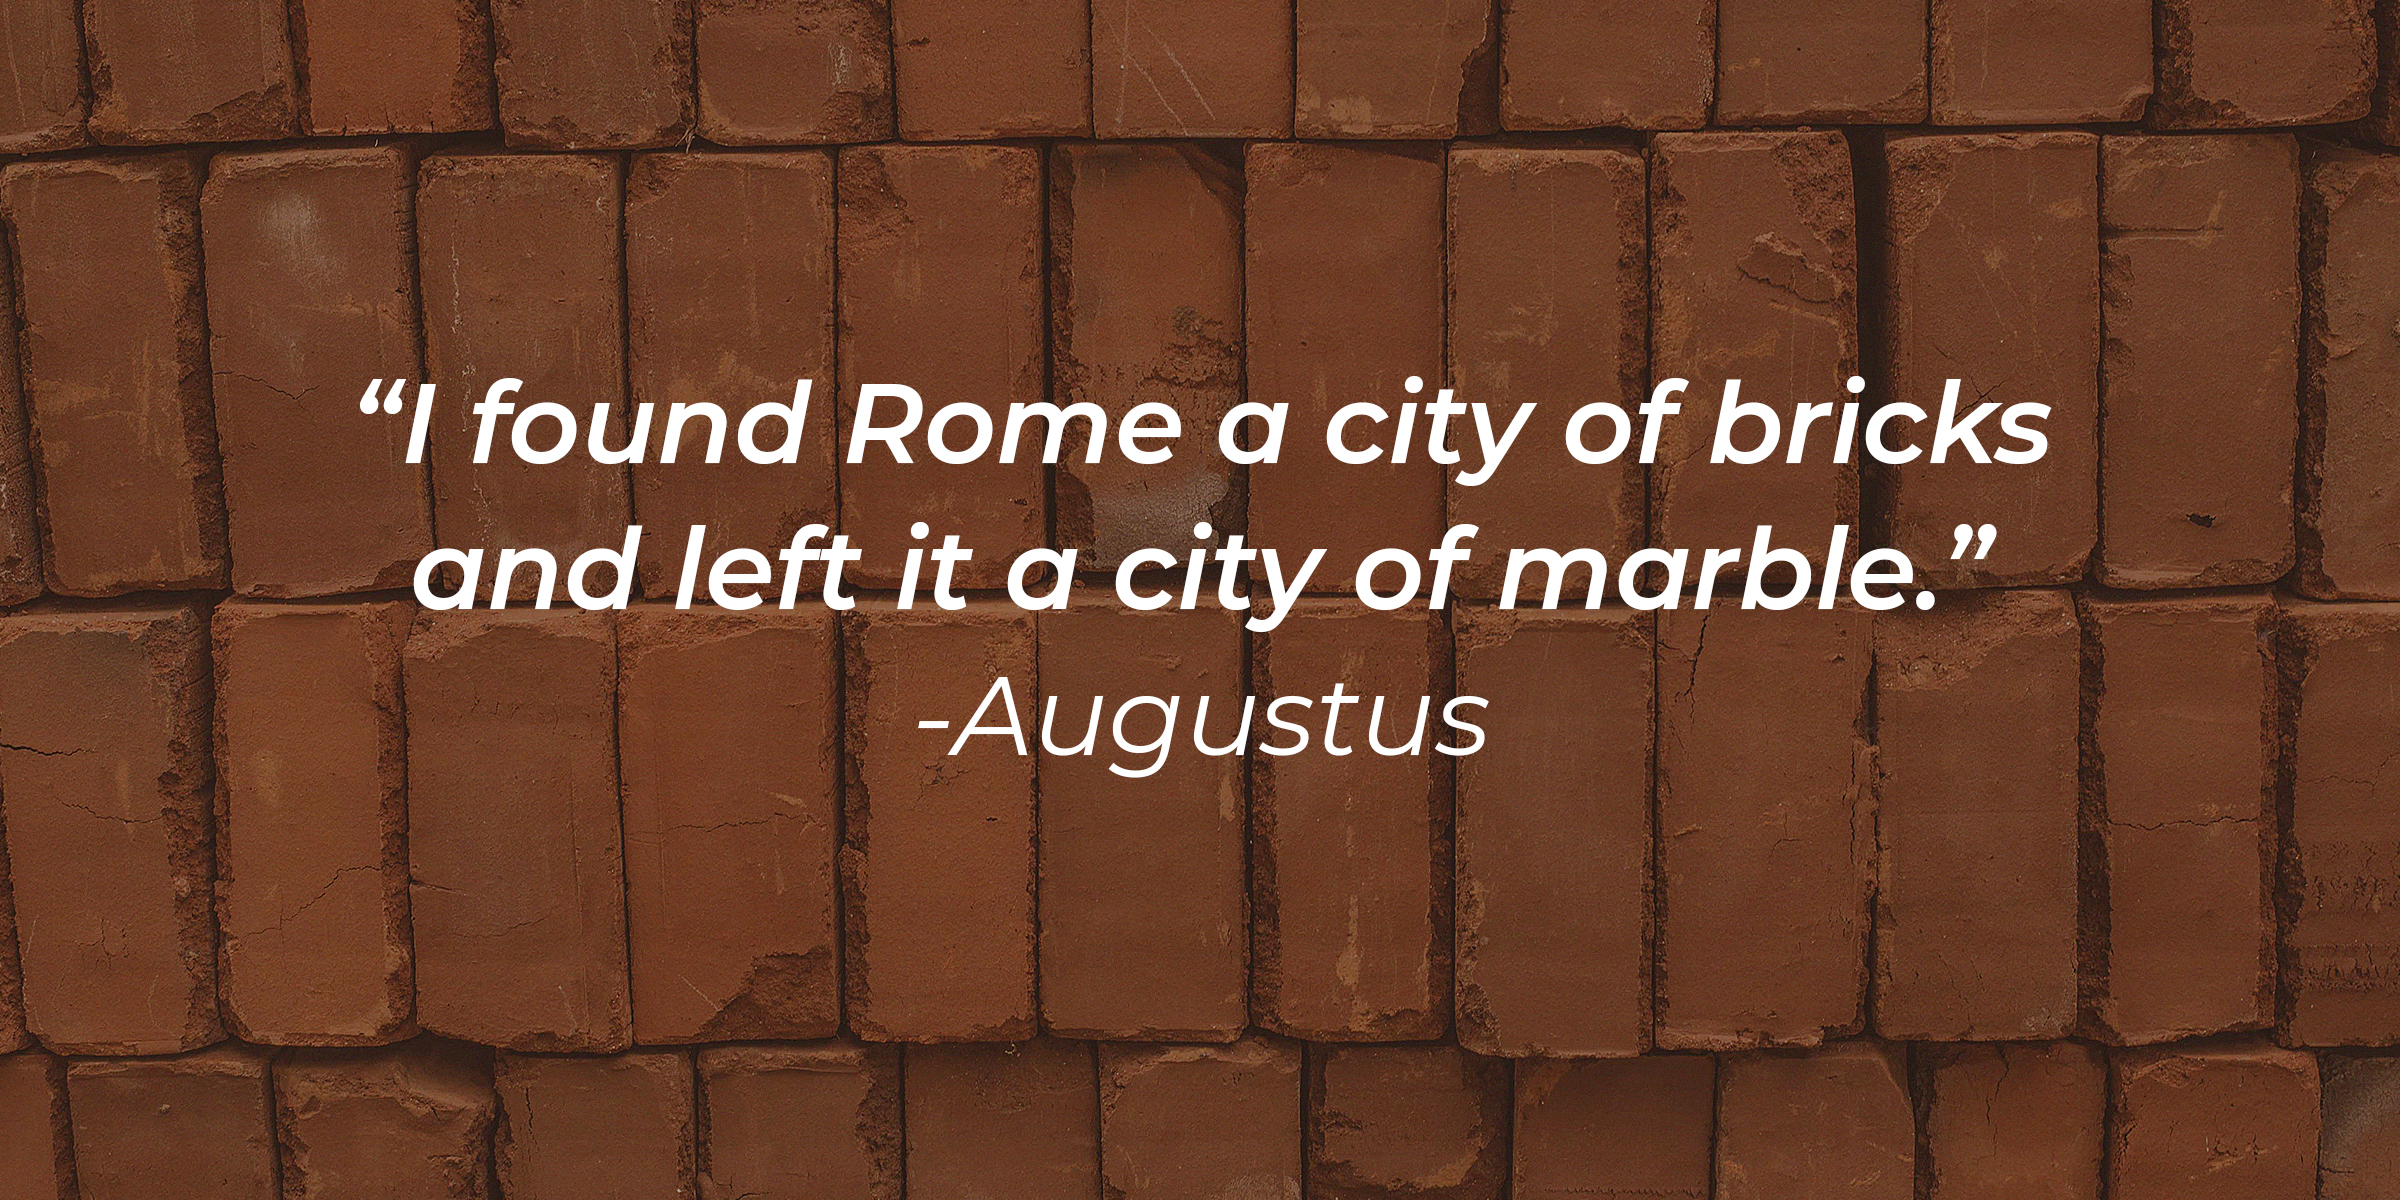 Photo of a brick wall with the quote: "I found Rome a city of bricks and left it a city of marble." | Source: Unsplash